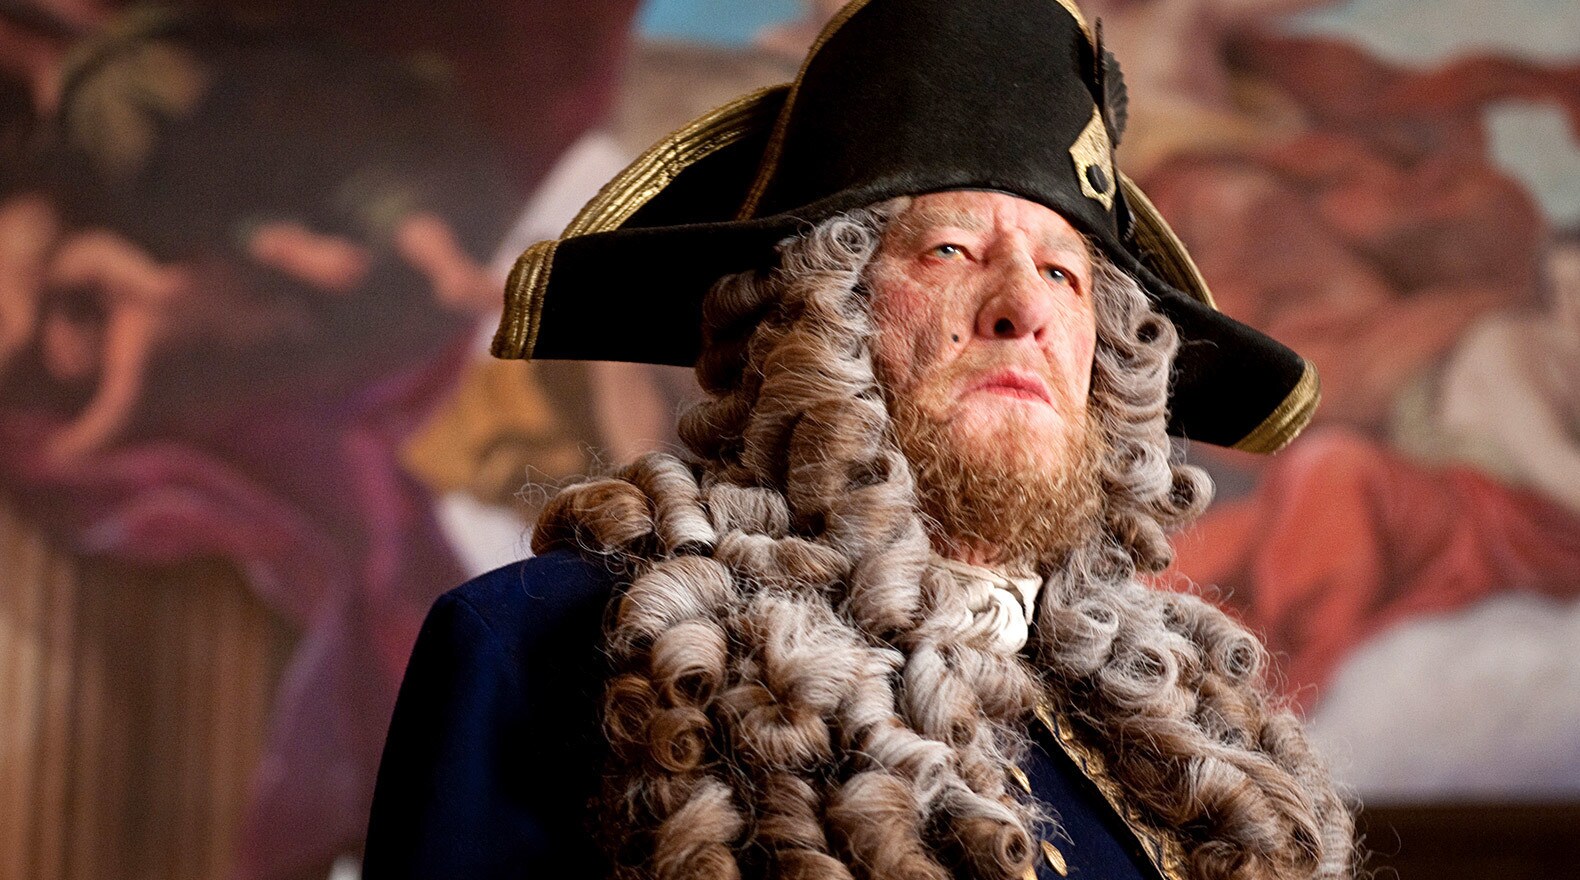 Turning from his pirate ways, Barbossa becomes a privateer for King George's Royal Navy...for now.